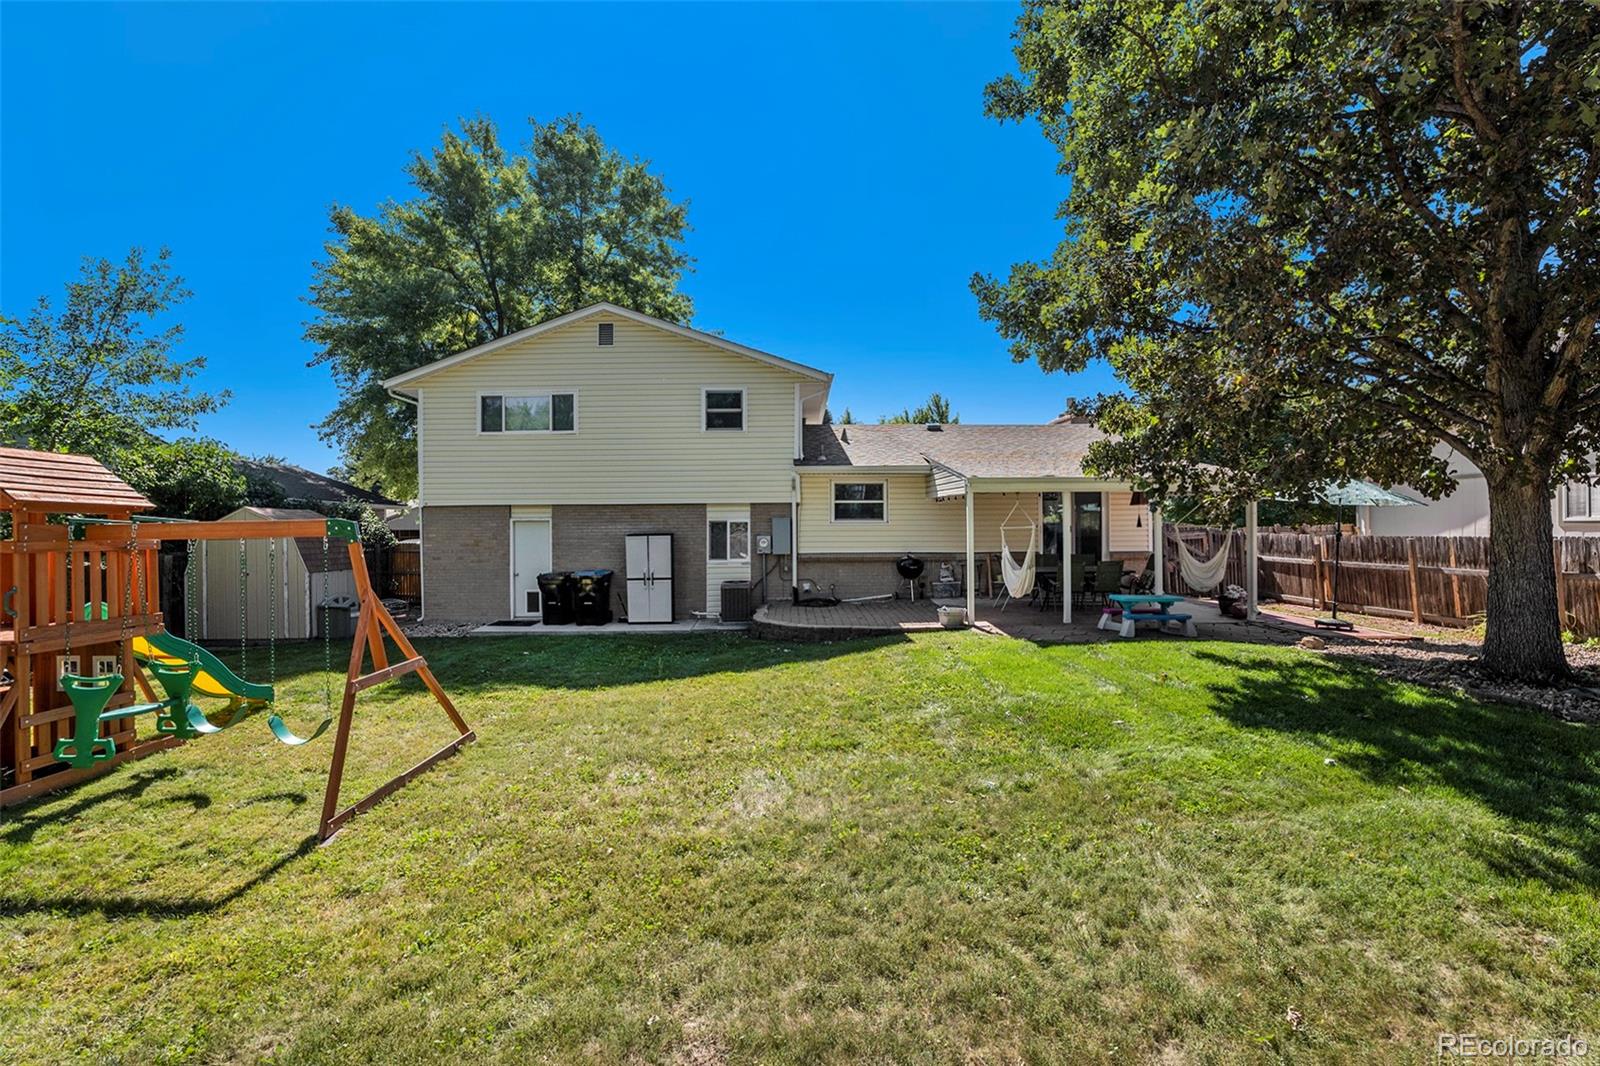 6434 W 82nd Drive, arvada MLS: 1735664 Beds: 3 Baths: 4 Price: $585,000